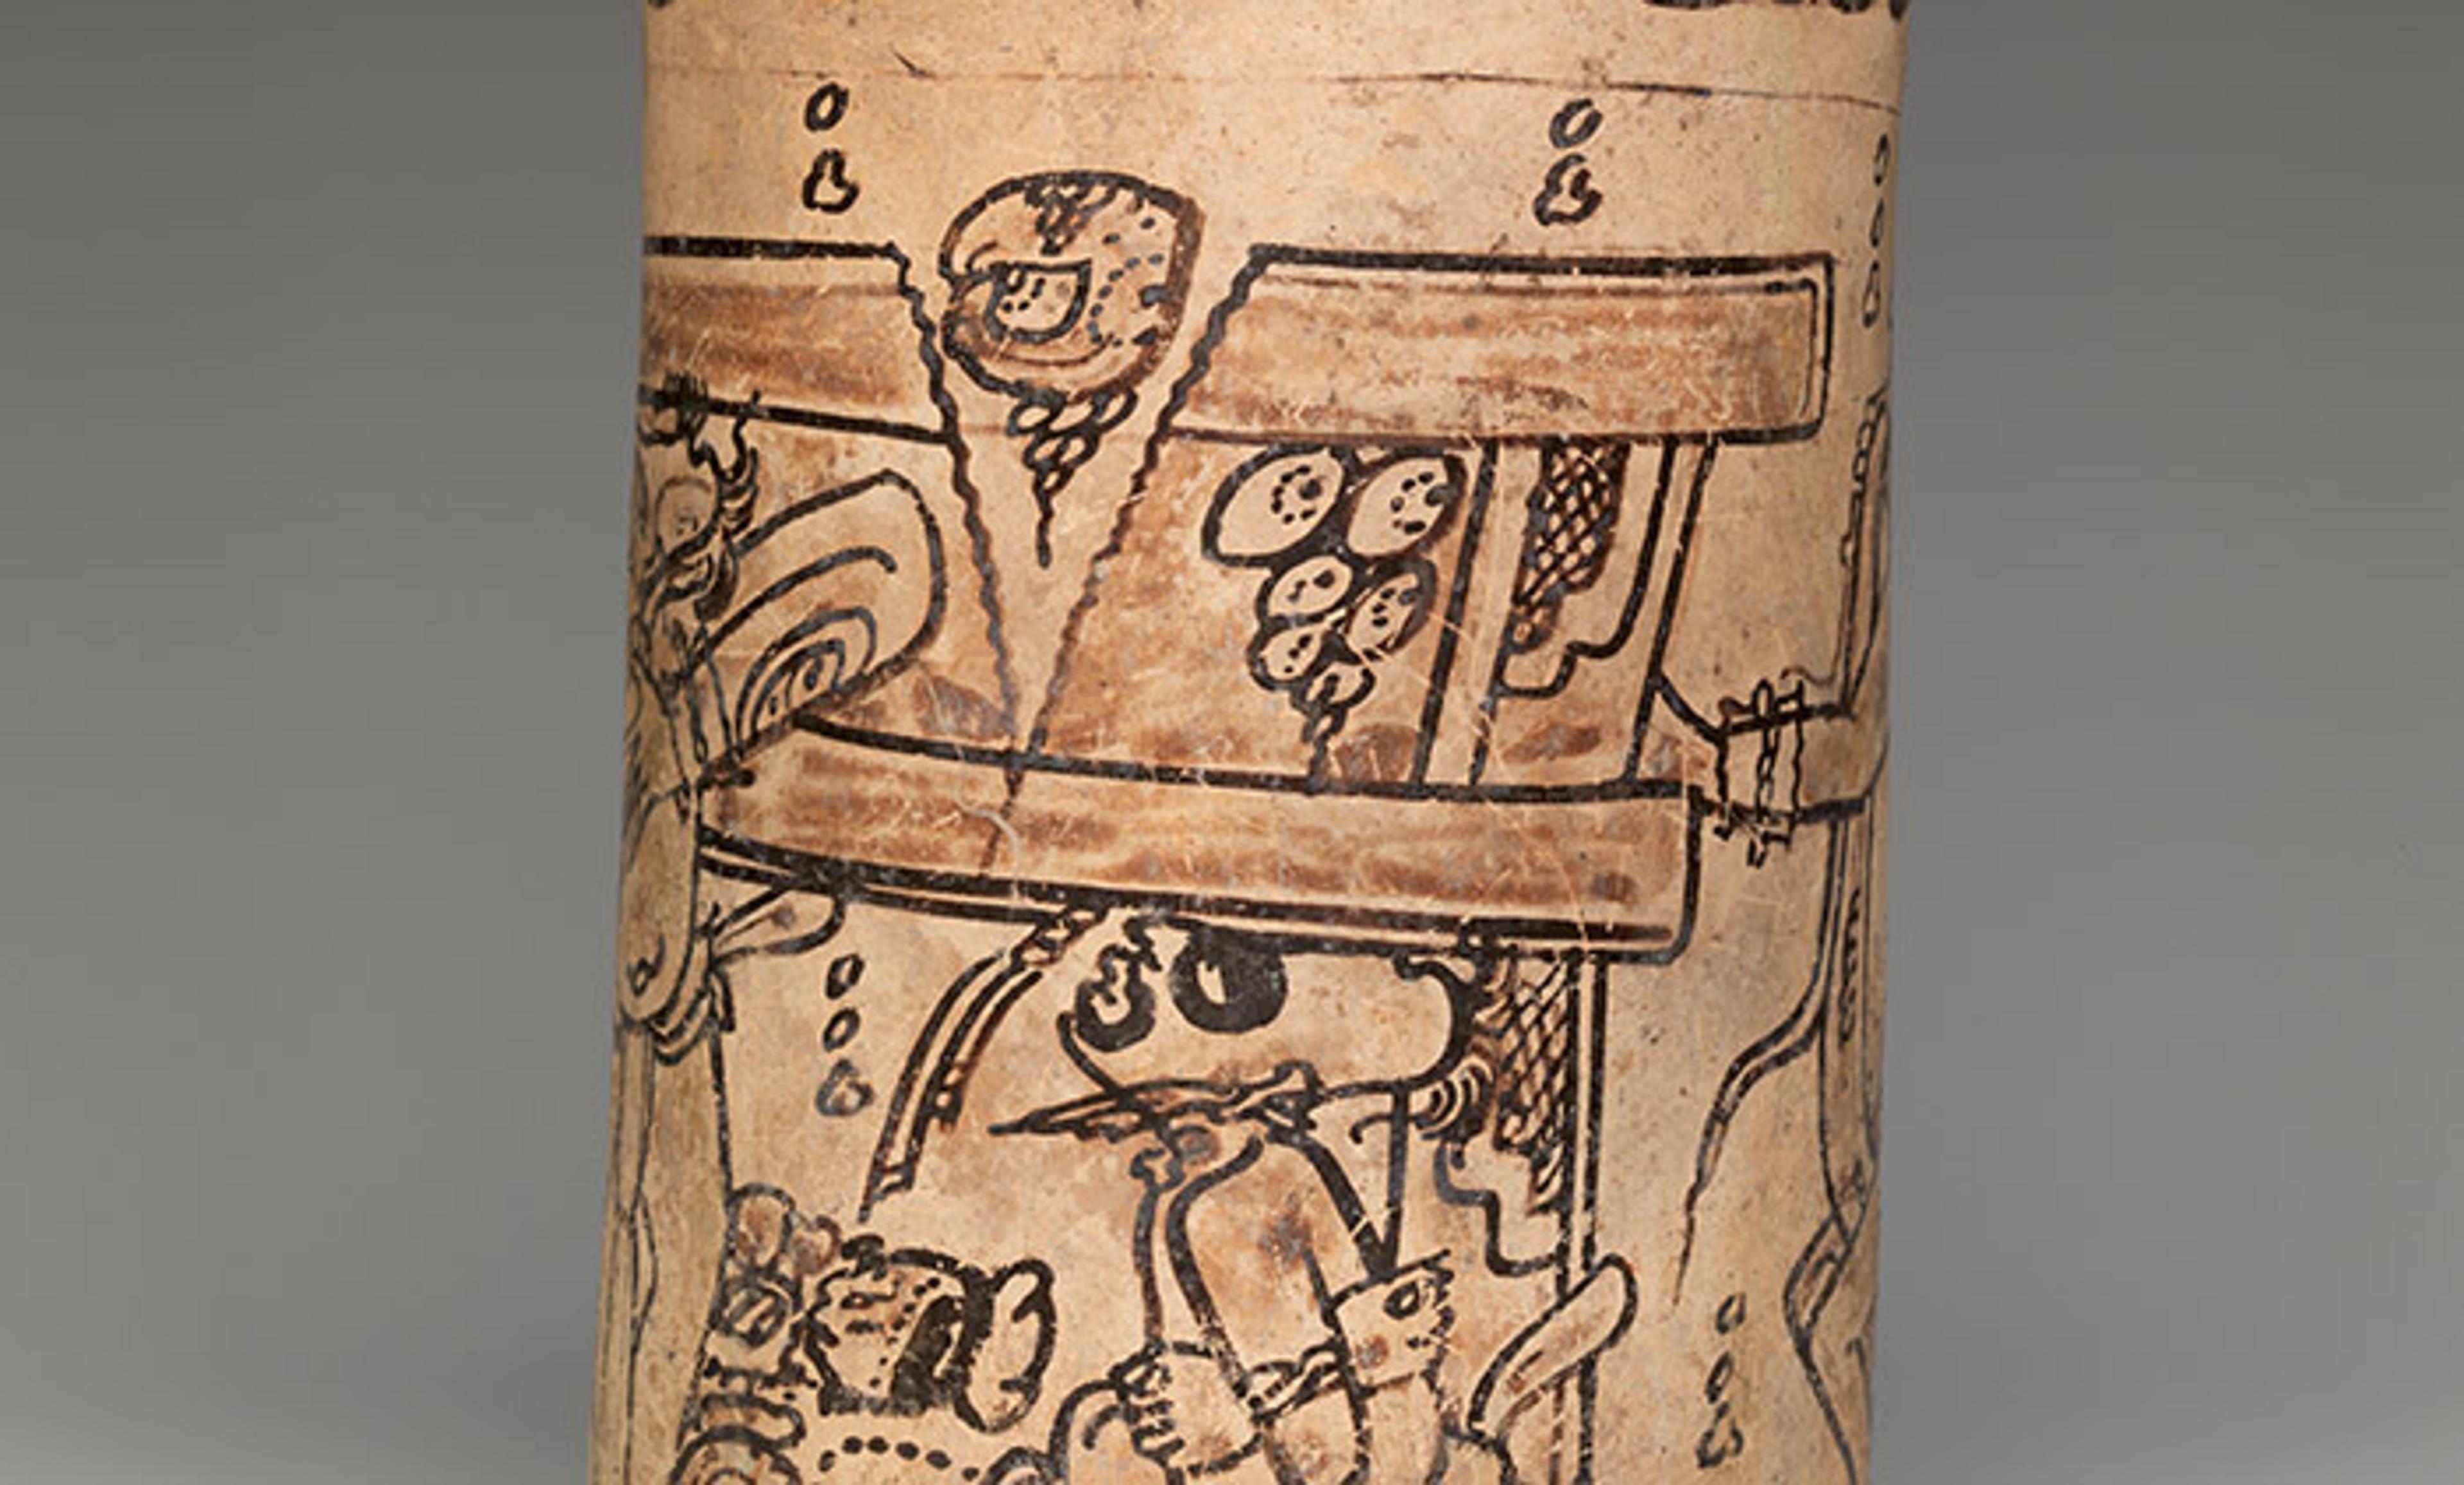 <p>Detail from a Mayan Codex-style vase, <em>c</em>7th or 8th century. <em>Courtesy </em><a href="https://www.metmuseum.org/art/collection/search/662967" target="_blank" rel="noreferrer noopener"><em>The Met Museum, New York</em></a></p>